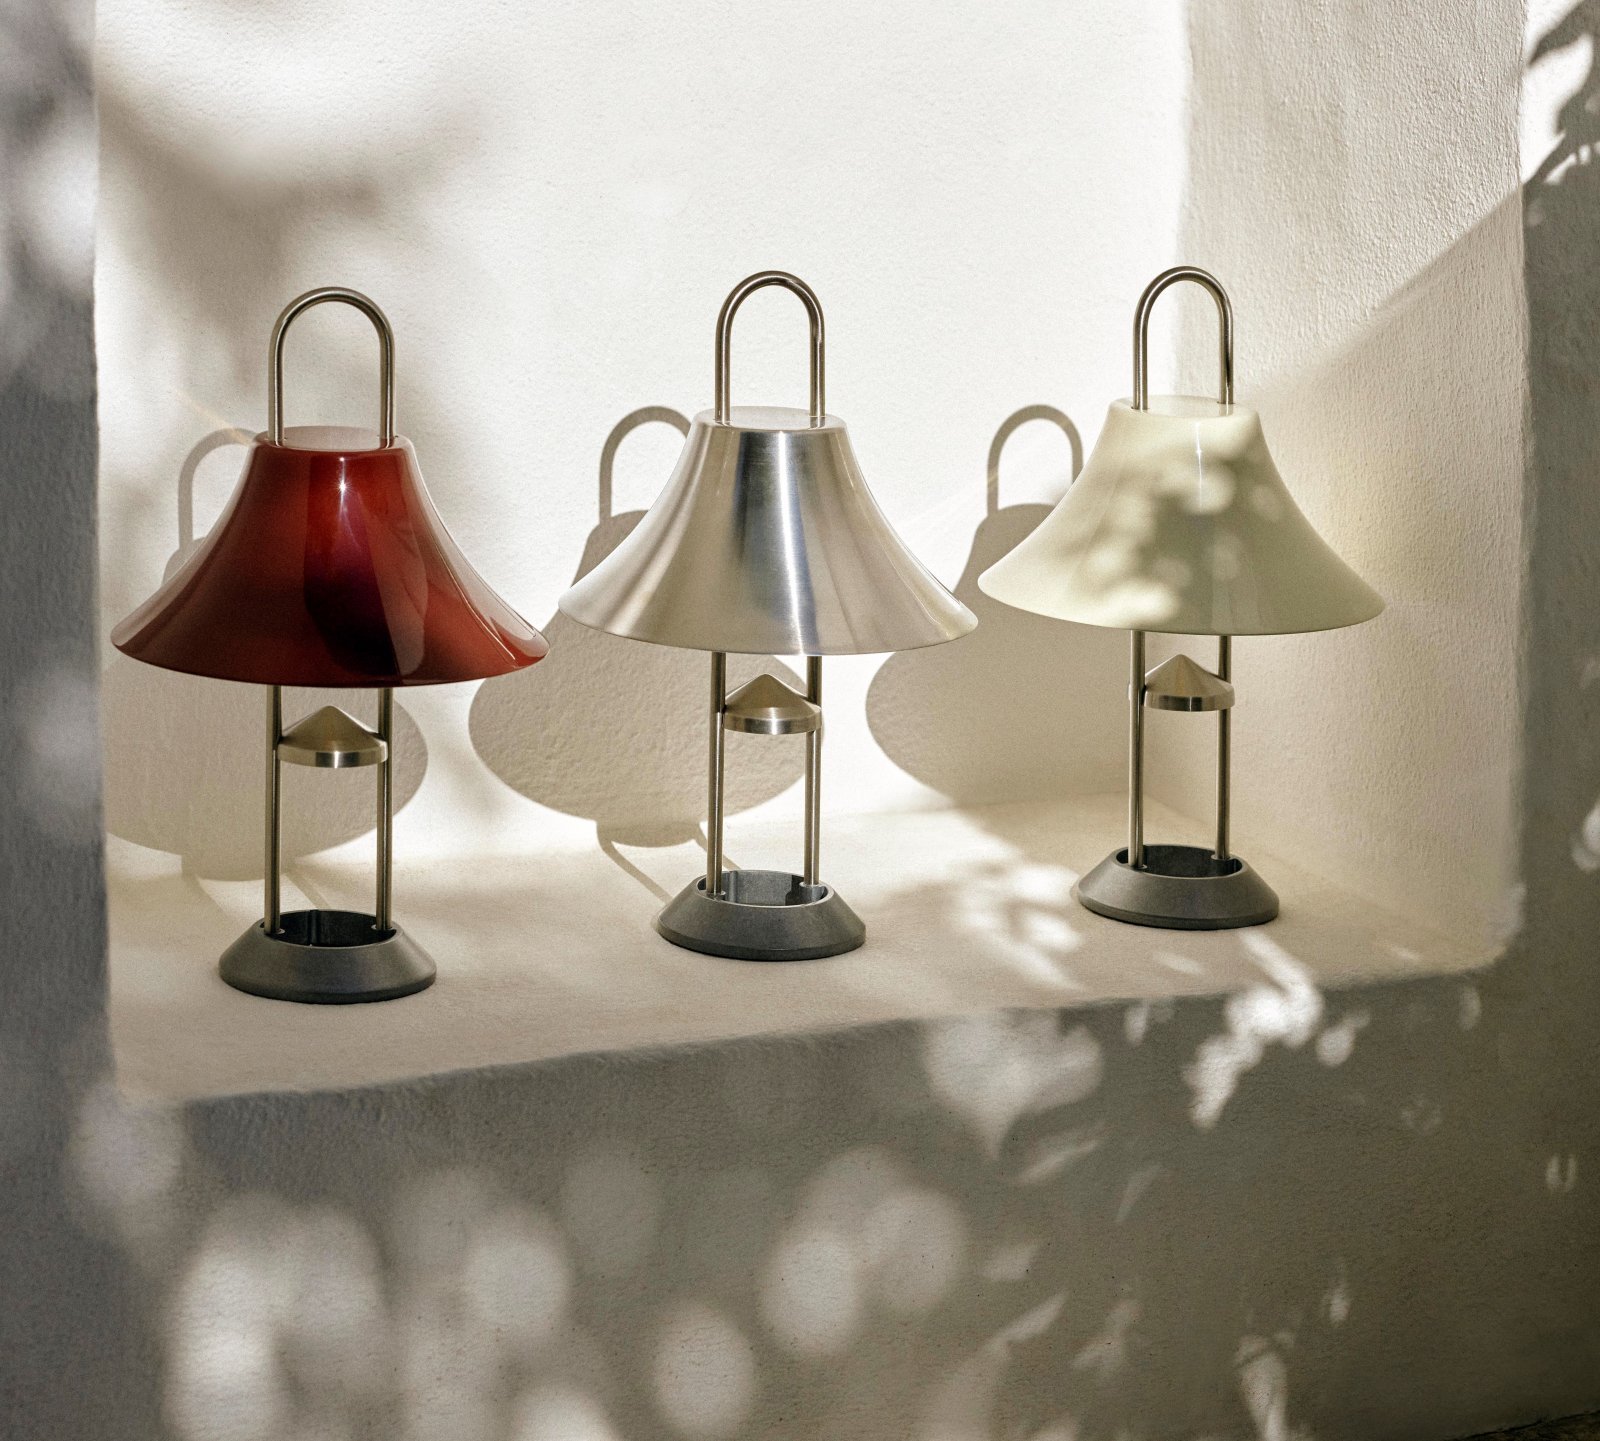 04_Mousqueton Lamp iron red_brushed stainless steel_oyster white.jpg